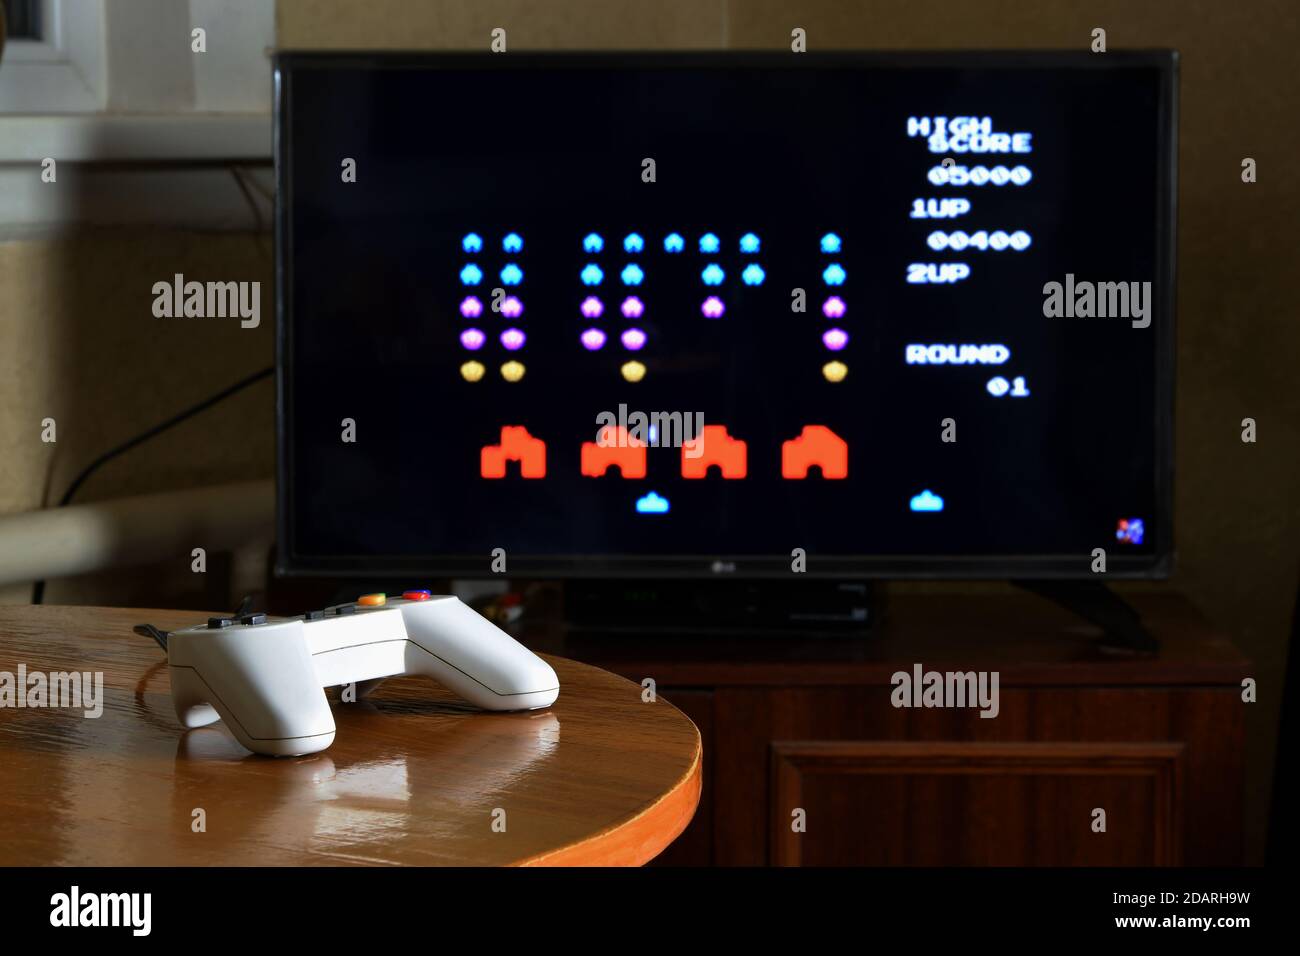 KHARKOV, UKRAINE - NOVEMBER 12, 2020: Dendy video game controller on table with Space invaders game on big display Stock Photo